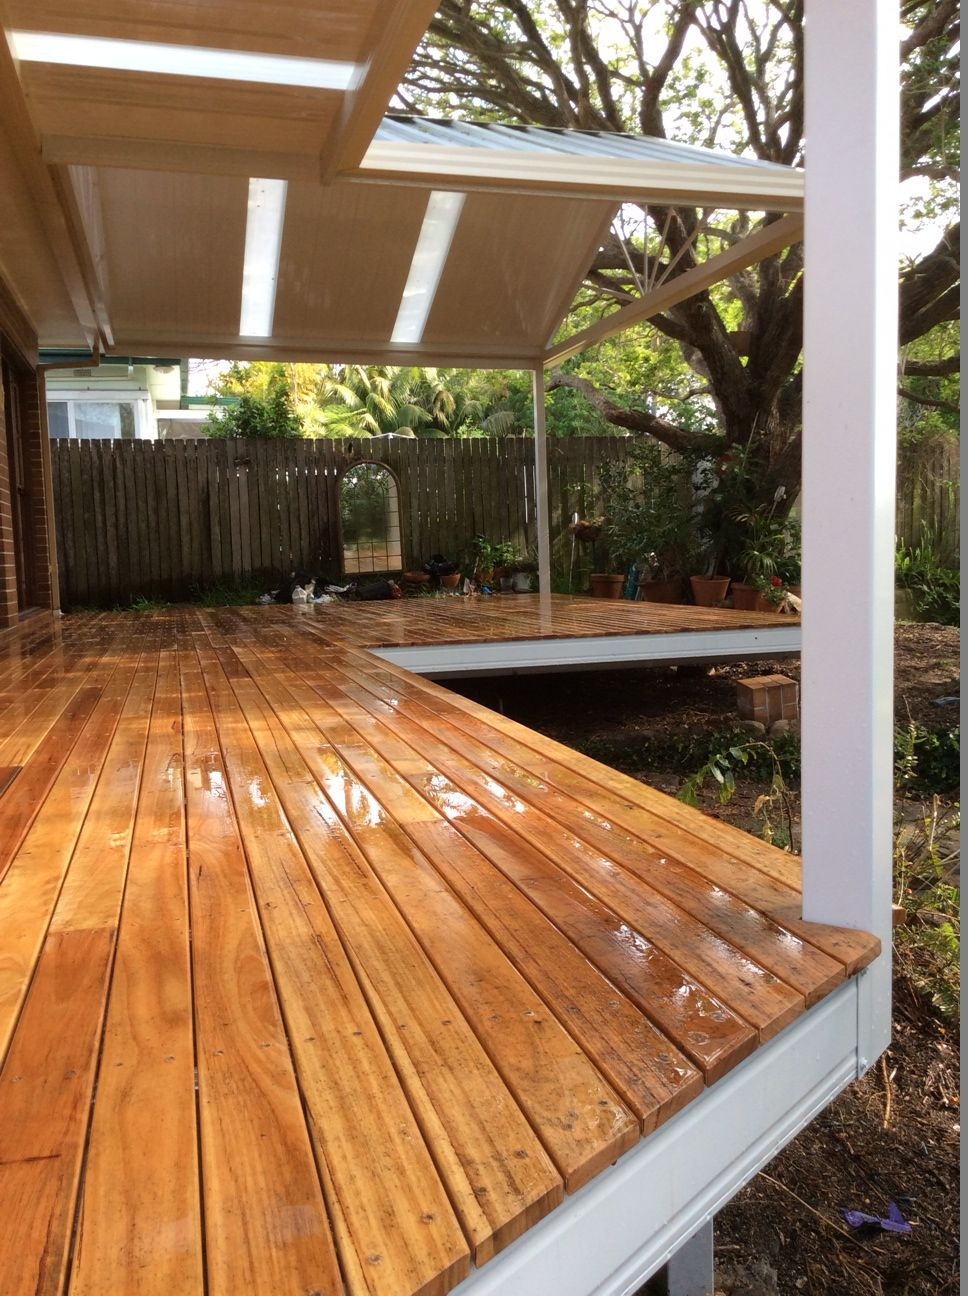 Spantec Boxspan Steel Frame Deck With Timber Decking Boards Over in measurements 968 X 1296